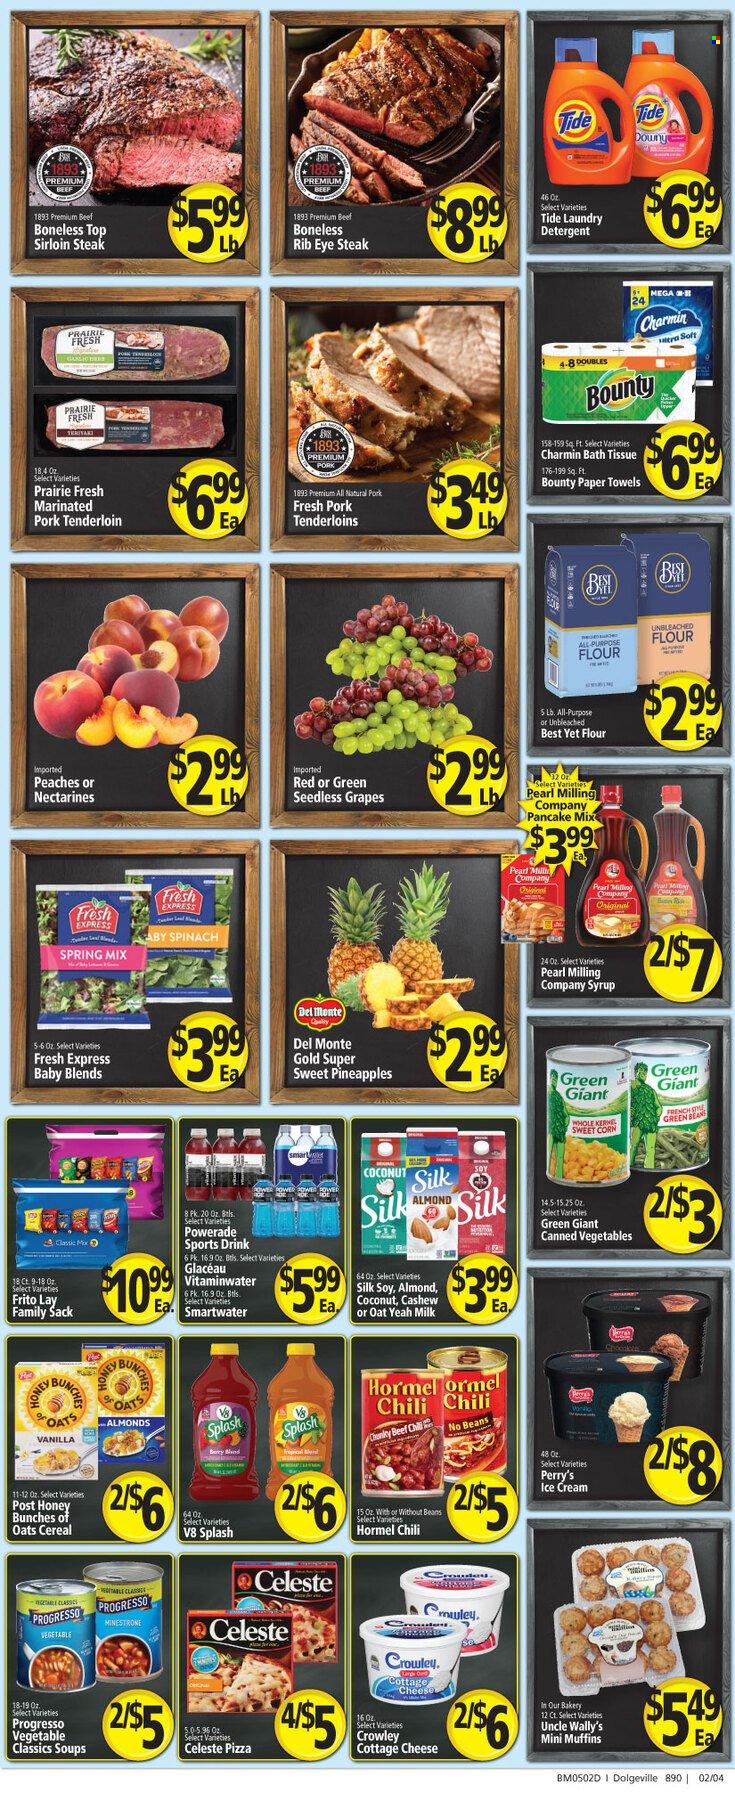 thumbnail - Big M Flyer - 01/27/2023 - 02/02/2023 - Sales products - muffin, beans, corn, garlic, sweet corn, grapes, seedless grapes, pineapple, coconut, pizza, pancakes, Progresso, Hormel, cottage cheese, milk, ice cream, Celeste, Bounty, all purpose flour, flour, canned vegetables, Del Monte, cereals, syrup, Powerade, Smartwater, red wine, wine, beef meat, beef sirloin, steak, sirloin steak, ribeye steak, pork meat, pork tenderloin, marinated pork, nectarines, peaches. Page 2.